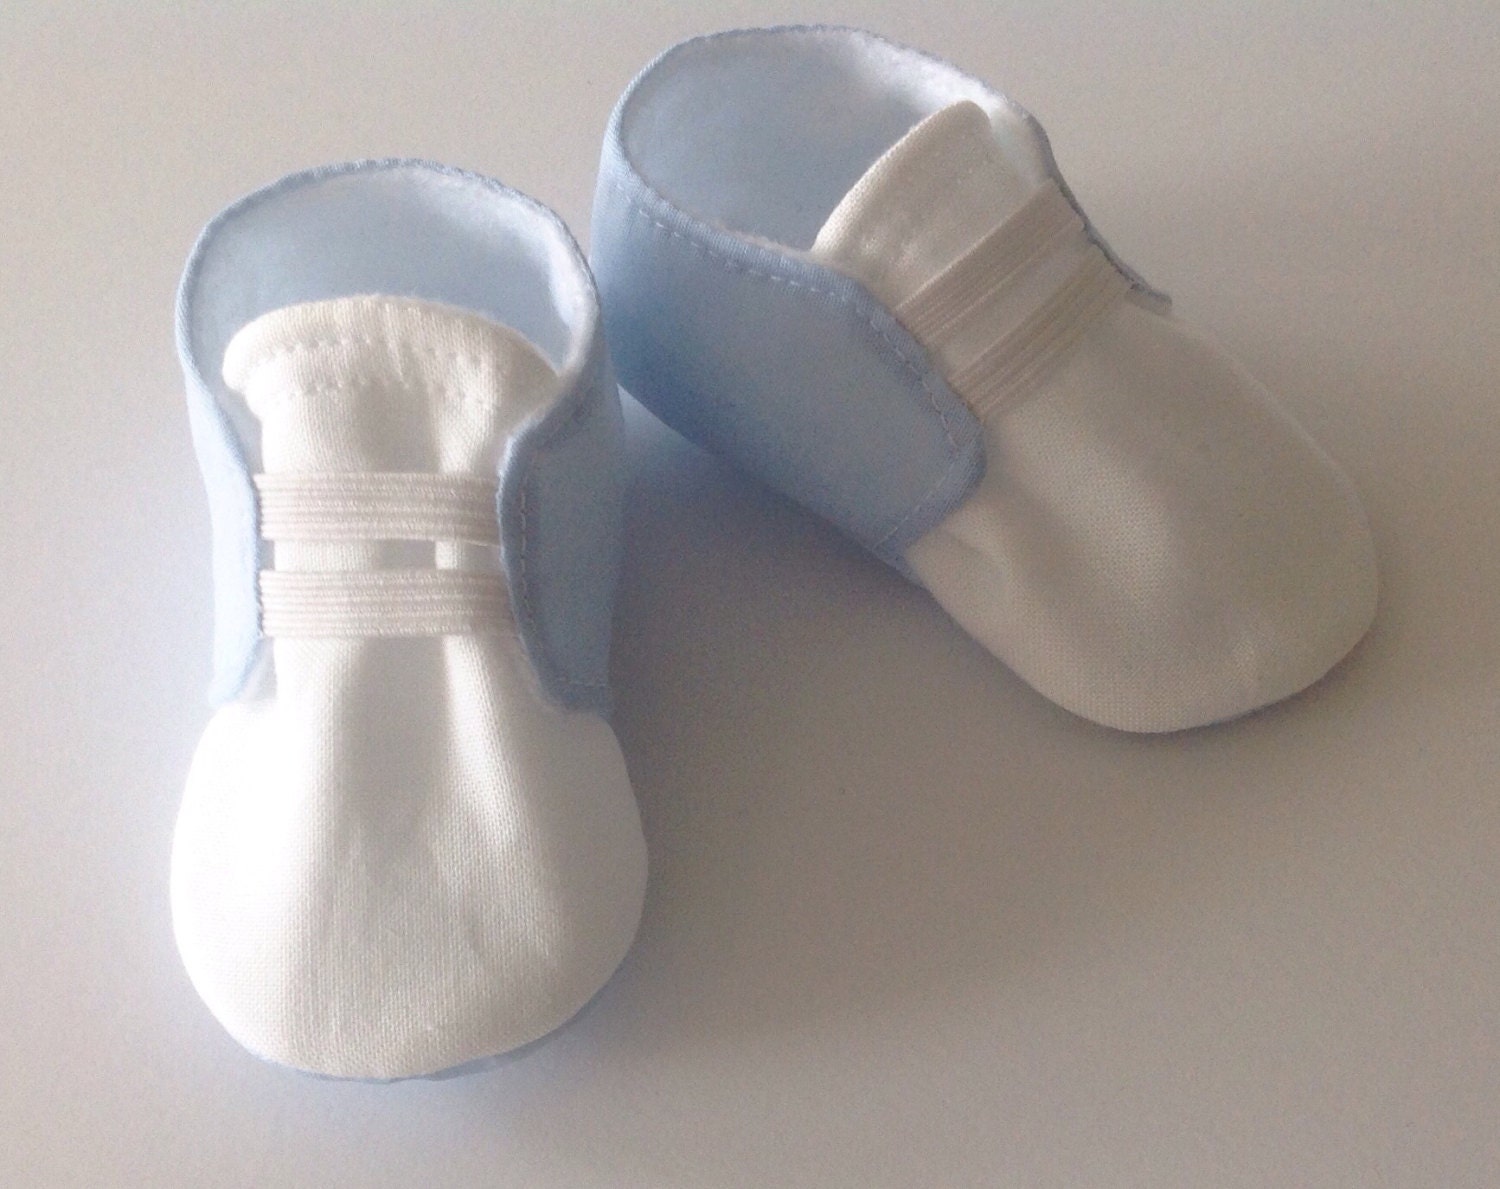 Blue & White Baby Shoes with Elastic Newborn size up to 18 | Etsy